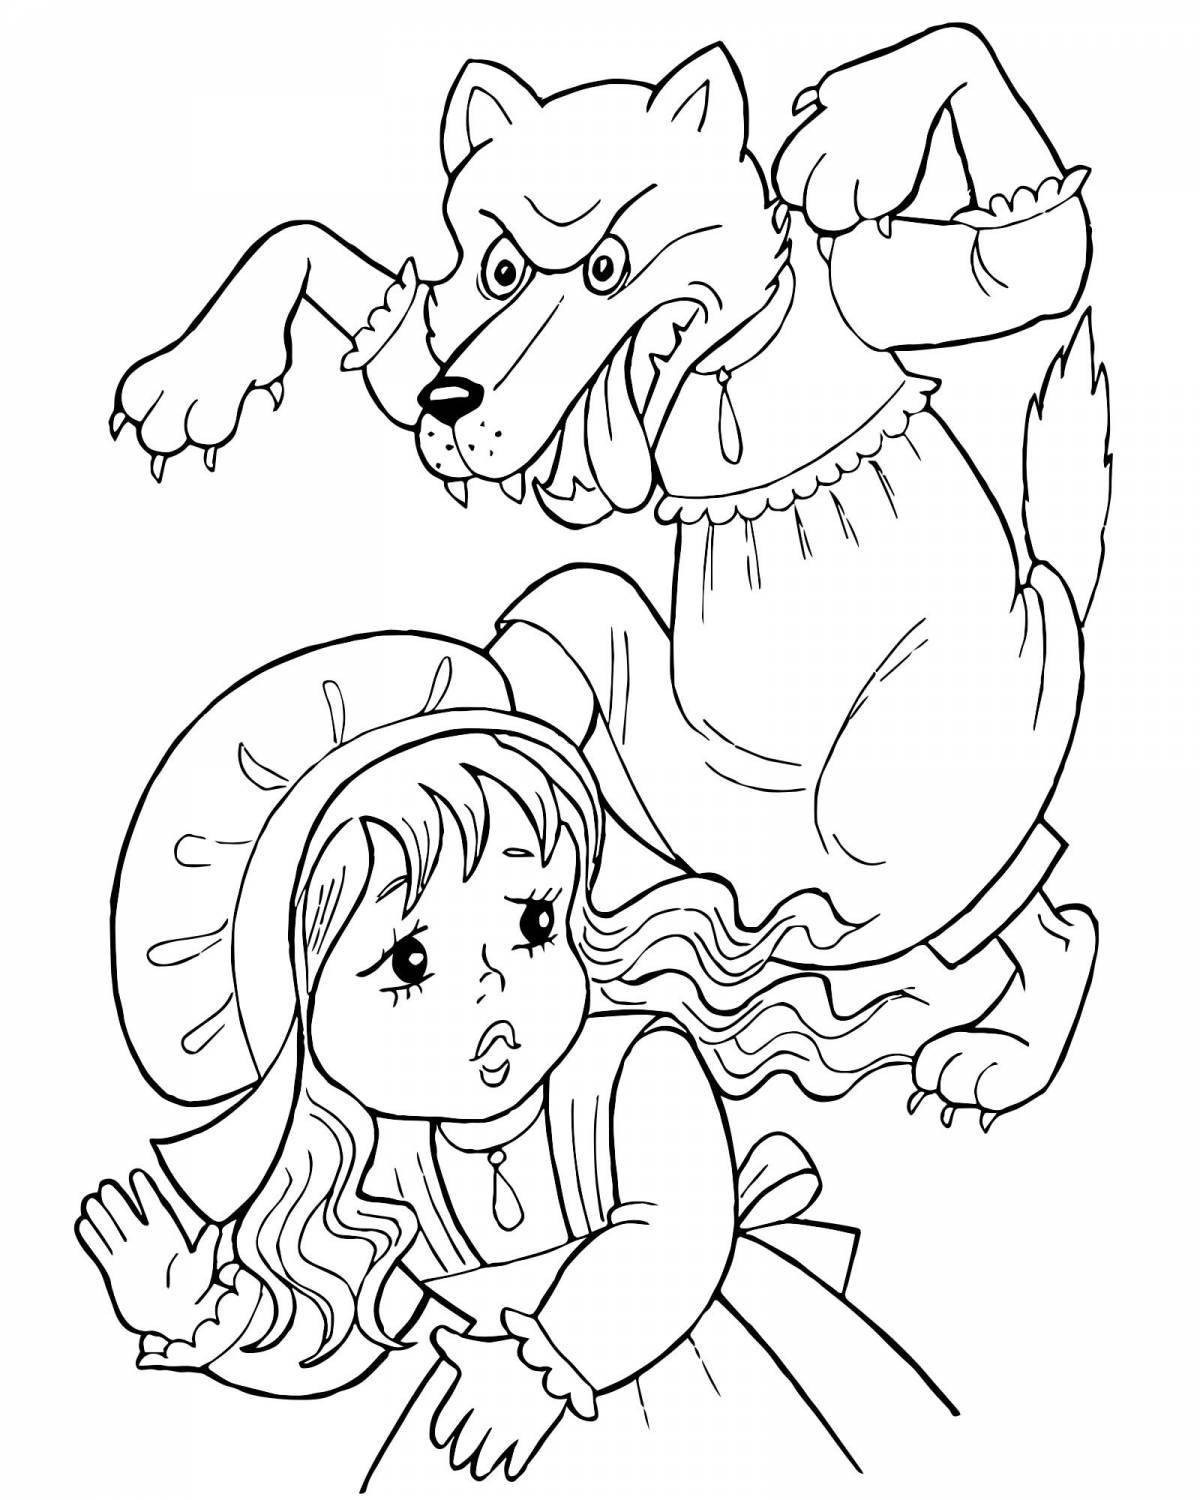 Coloring book majestic gray wolf and Little Red Riding Hood